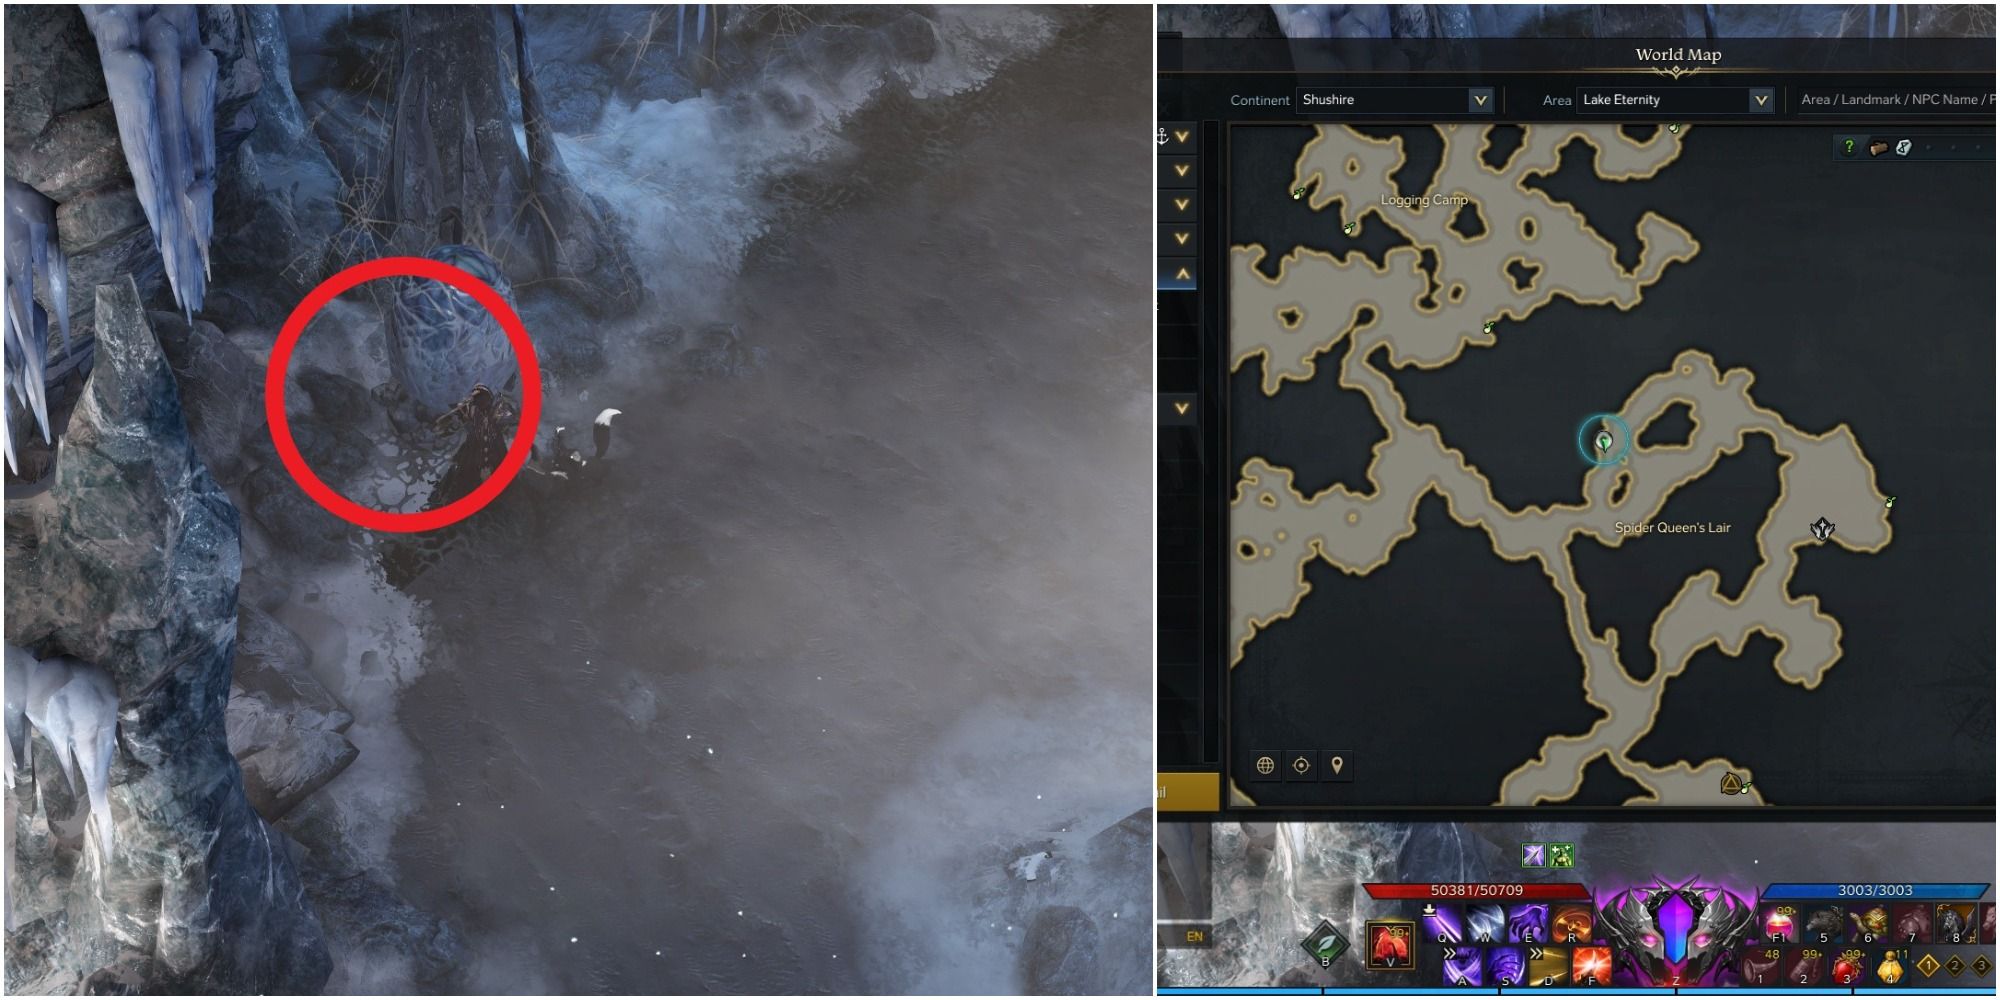 Lost Ark split image of Frozen Spider Egg location on the map and its location on the ground with a red circle around the snowy ground